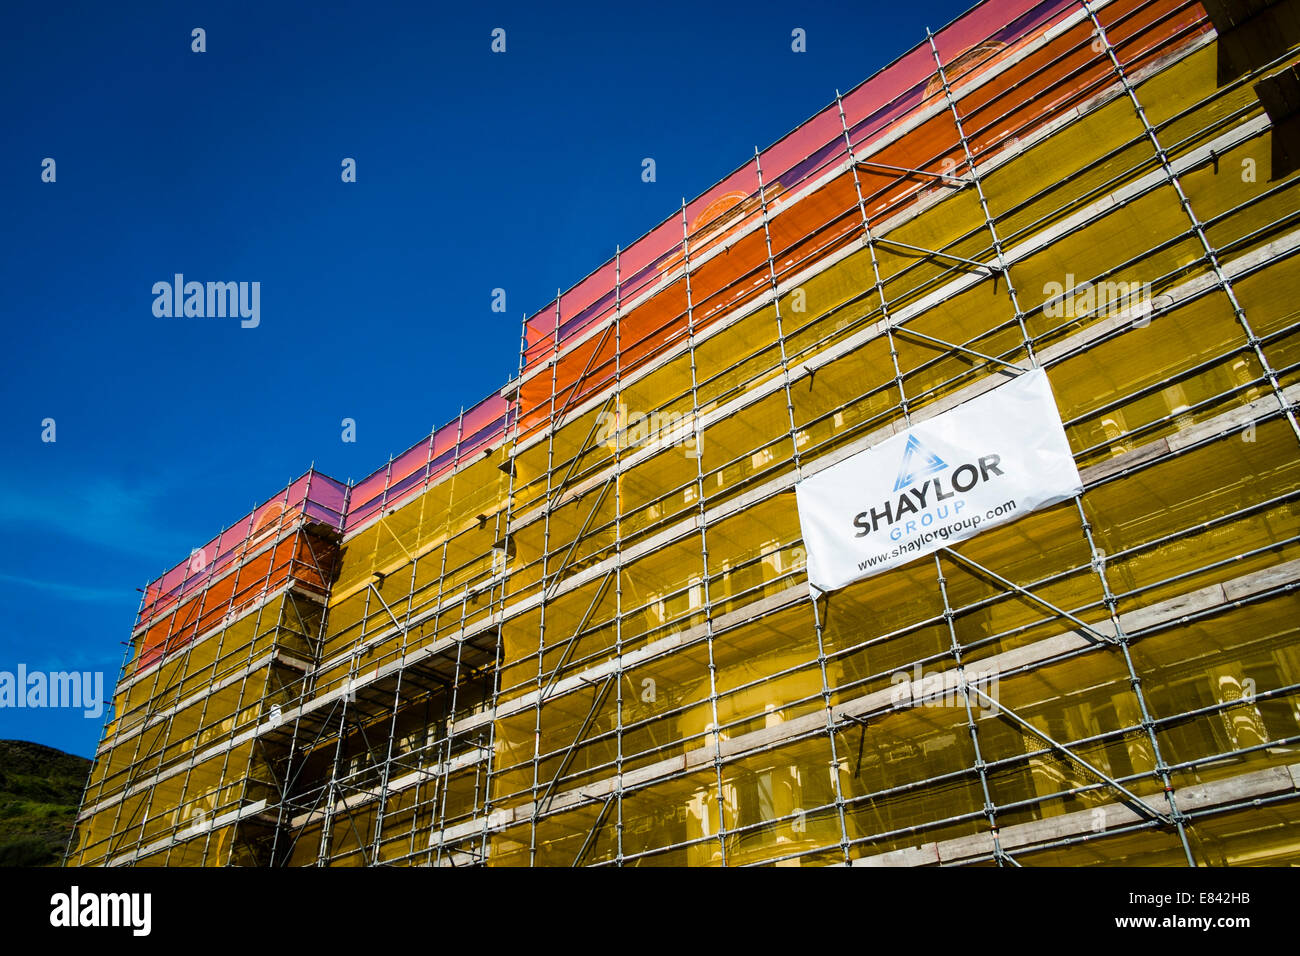 Scaffolding on property and logo banner for Shaylor group construction building refurbishment contractors  company firm UK Stock Photo